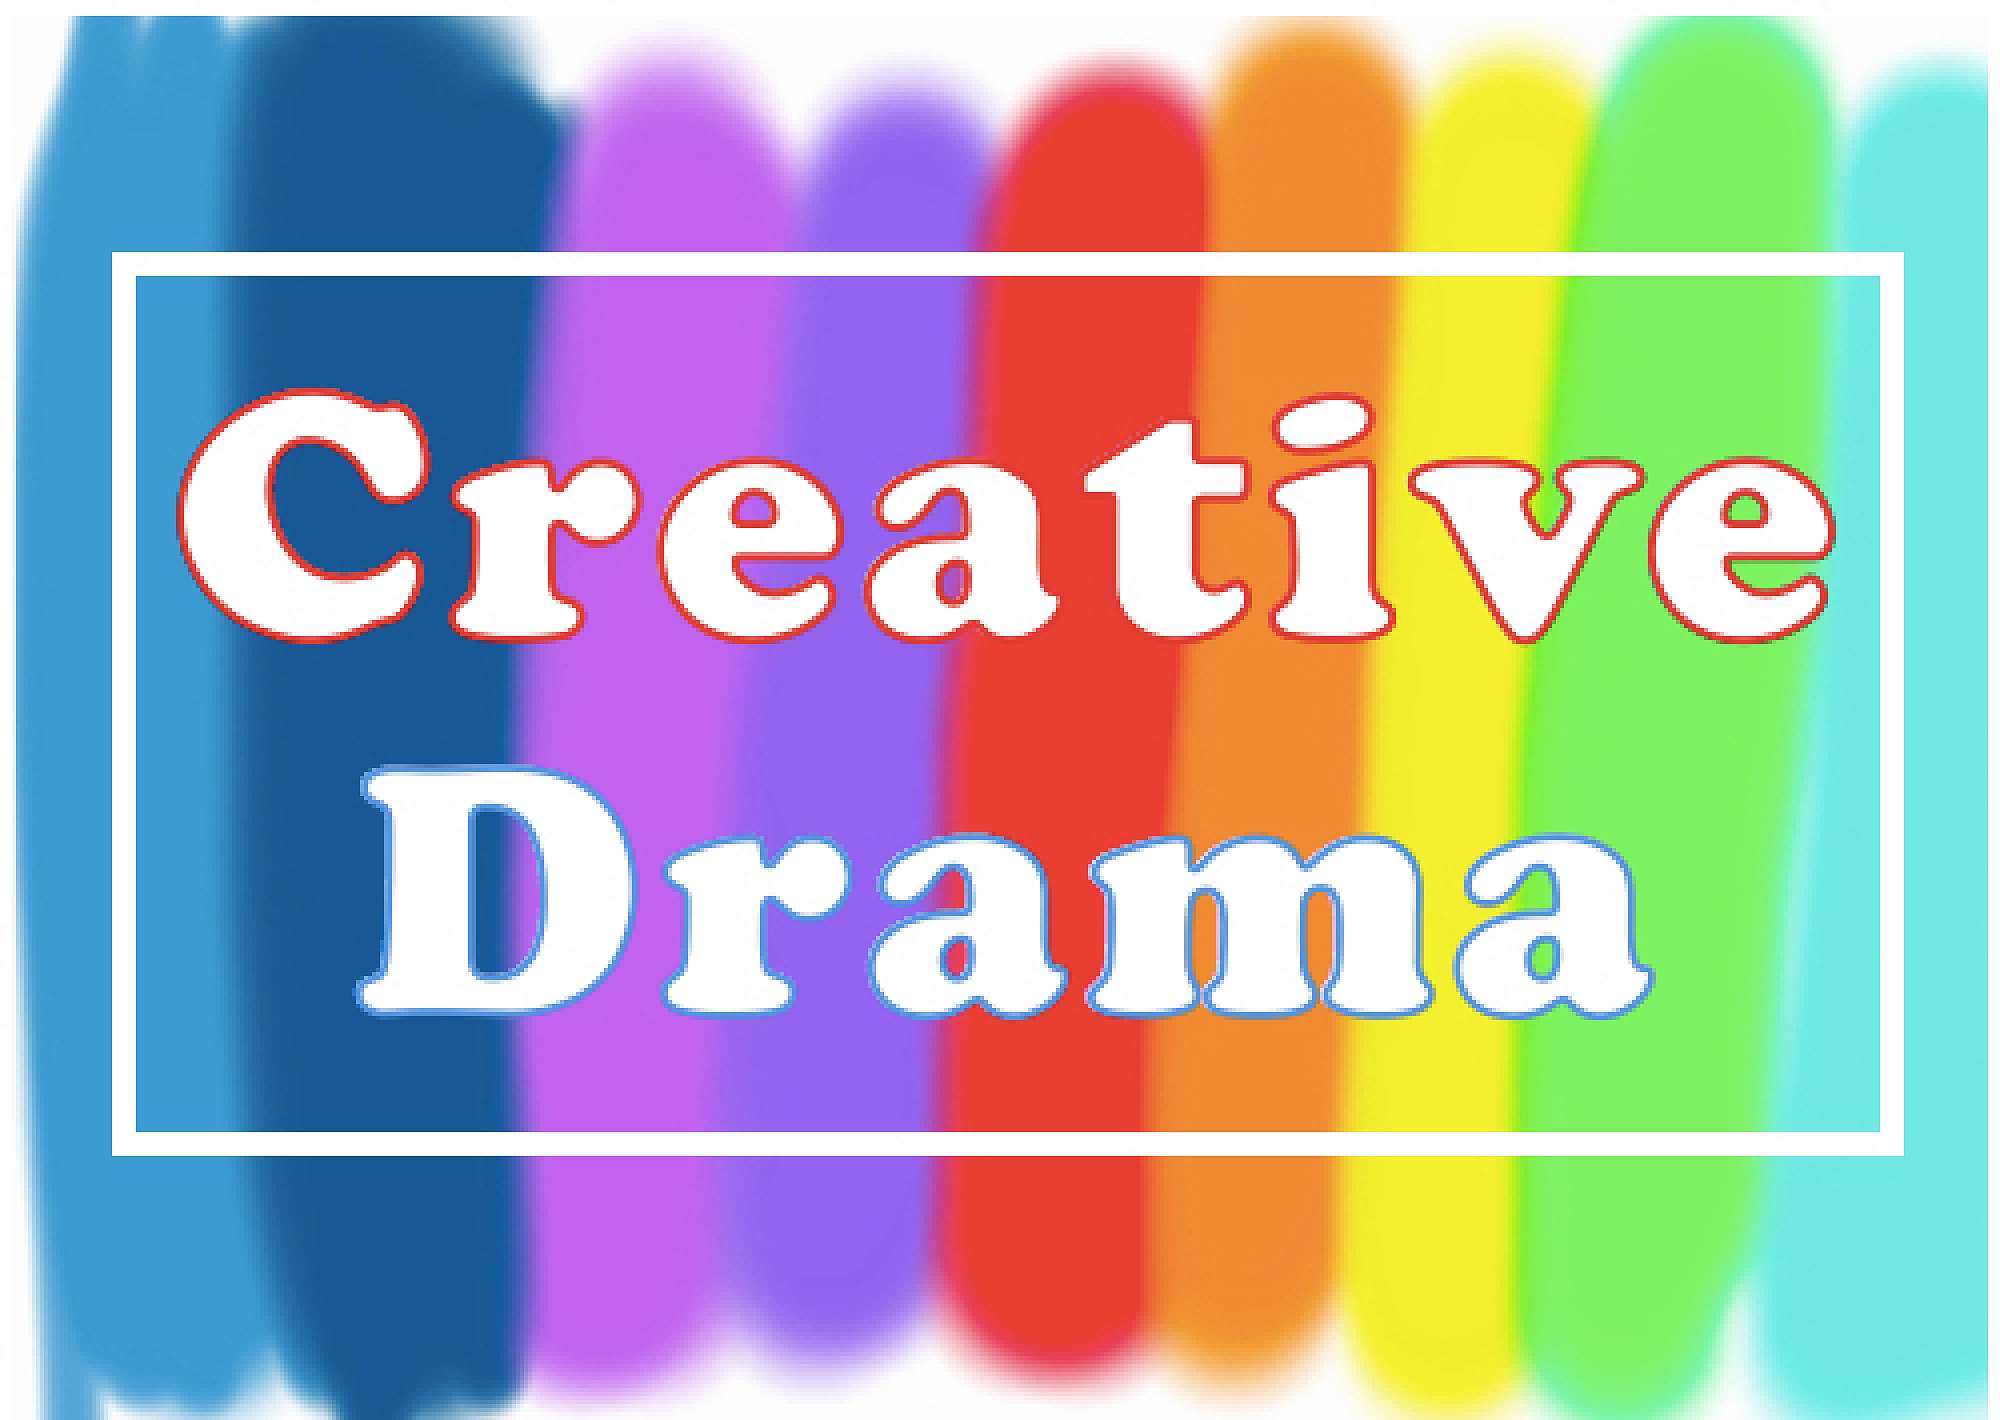 what is the importance of drama in creative writing